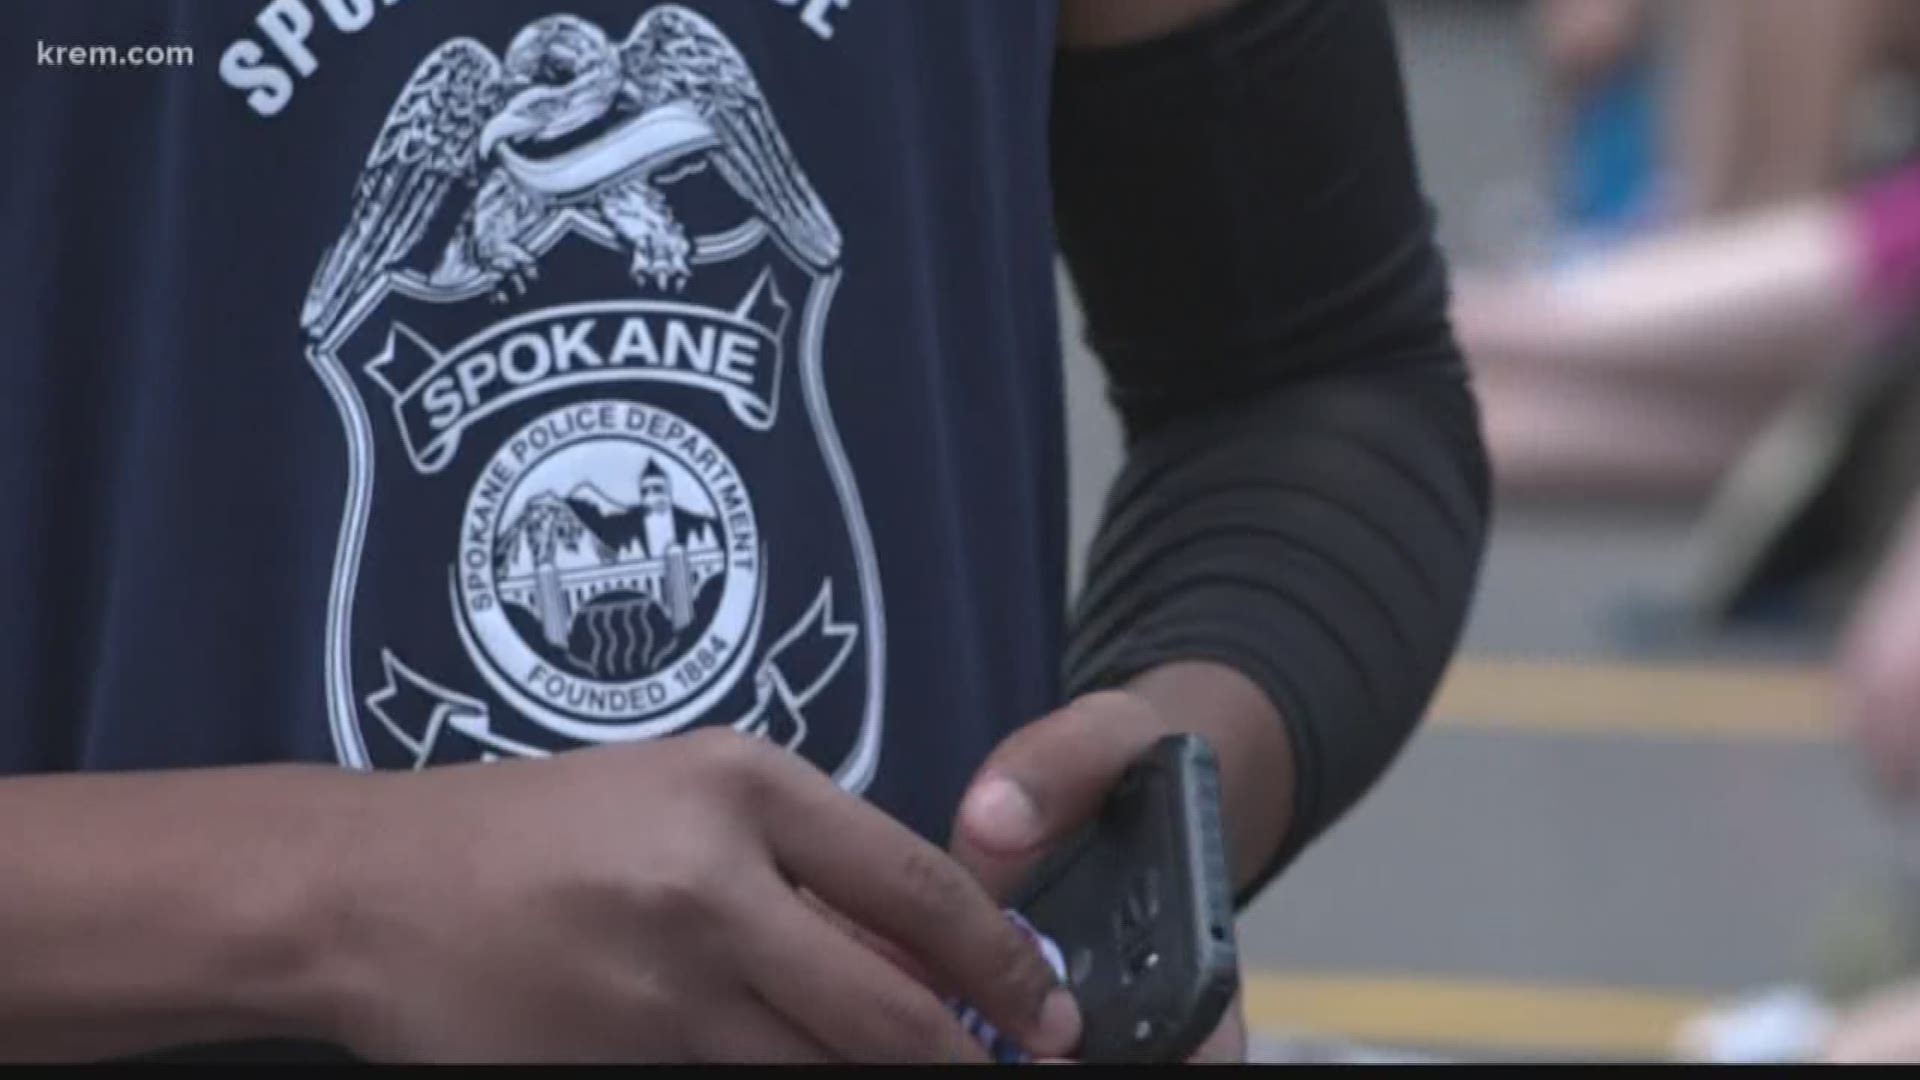 KREM's Shayna Waltower met with Spokane Police about the team they are sponsoring of at-risk teens in this year's Hoopfest.